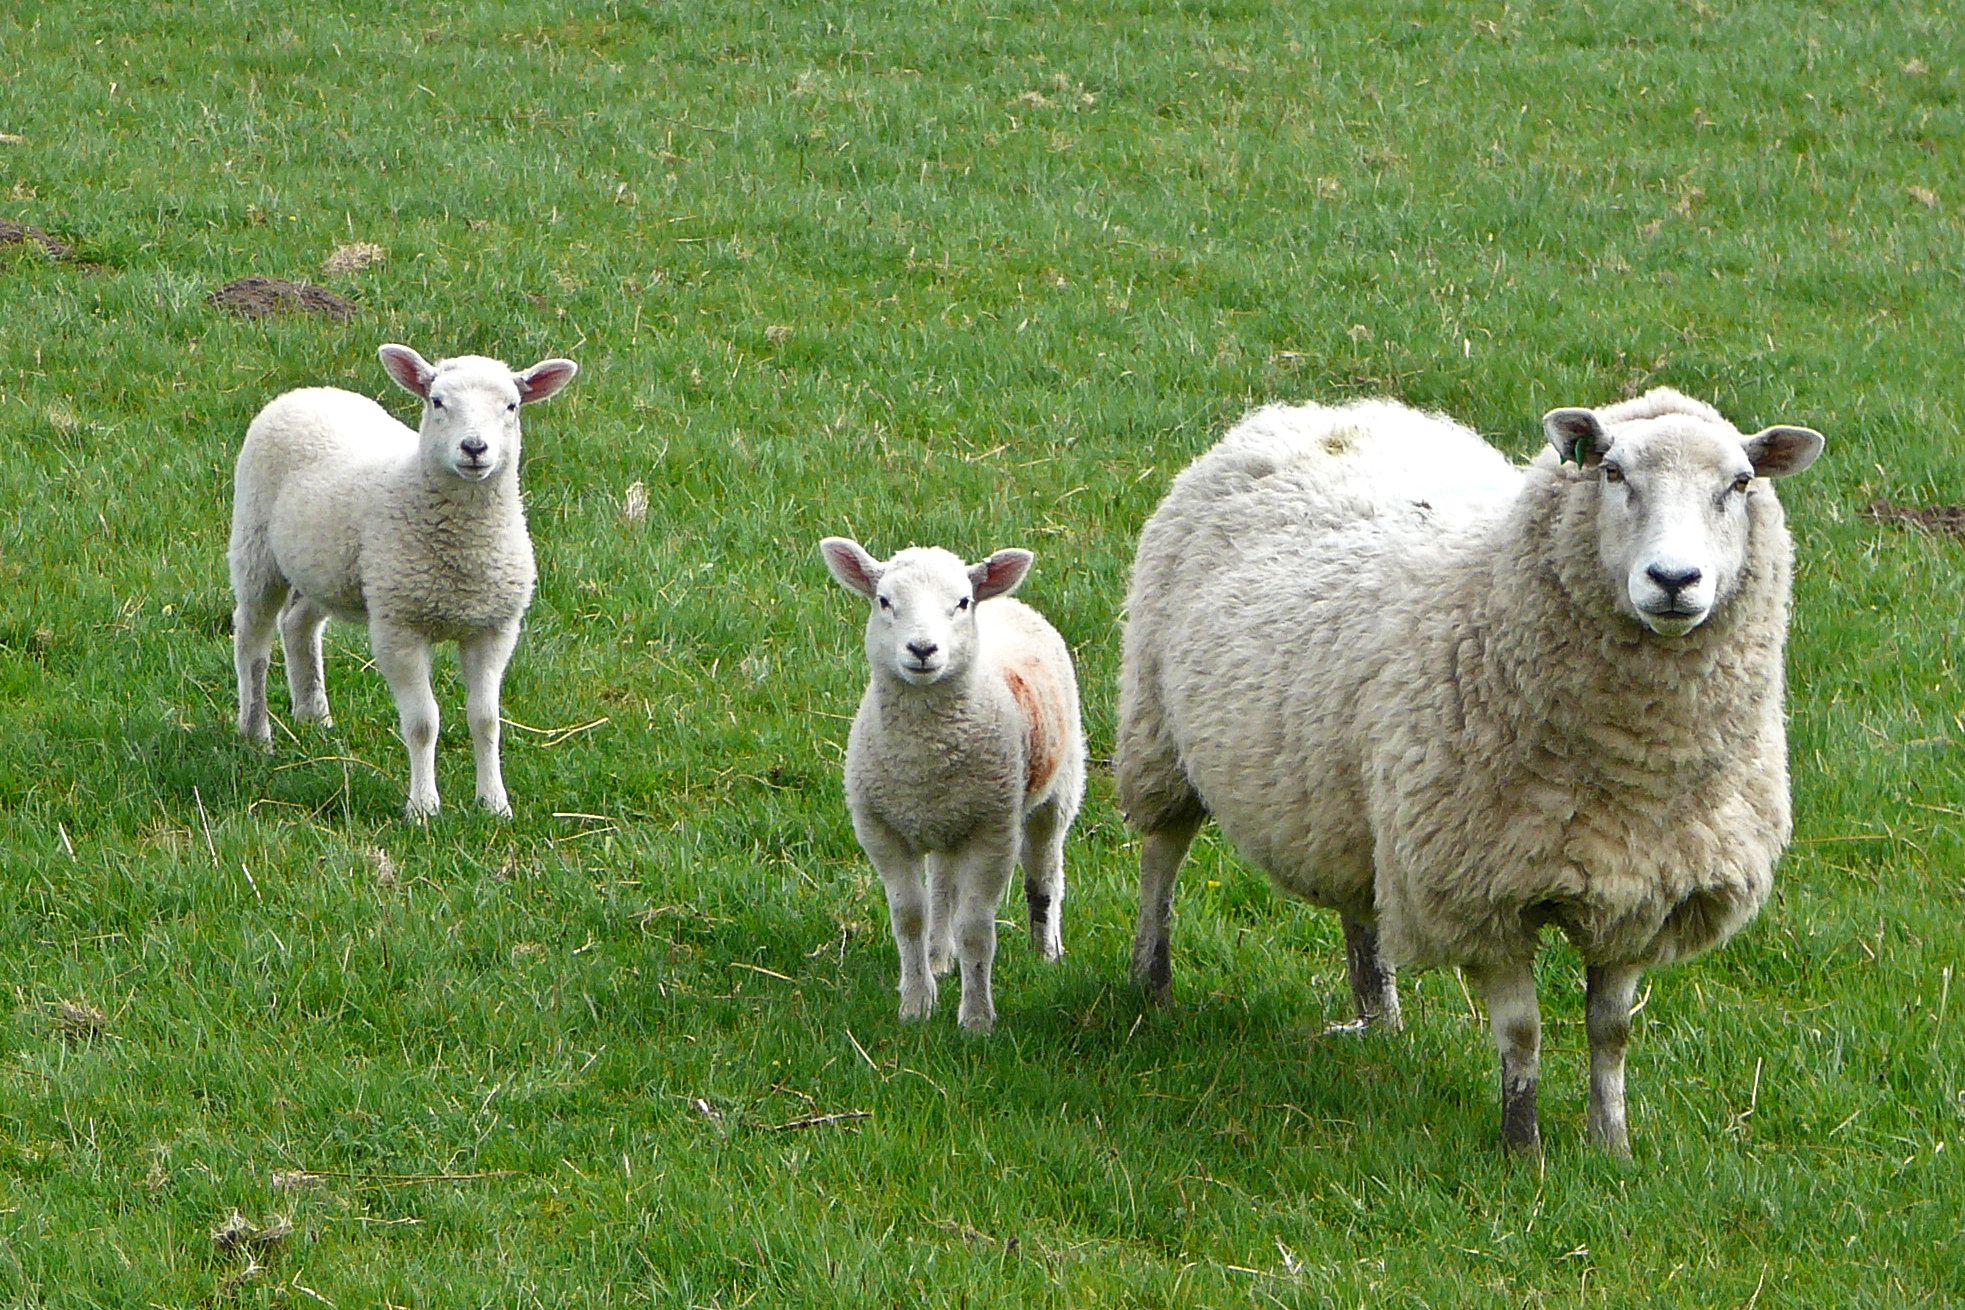 three sheep are in the middle of the grassy field